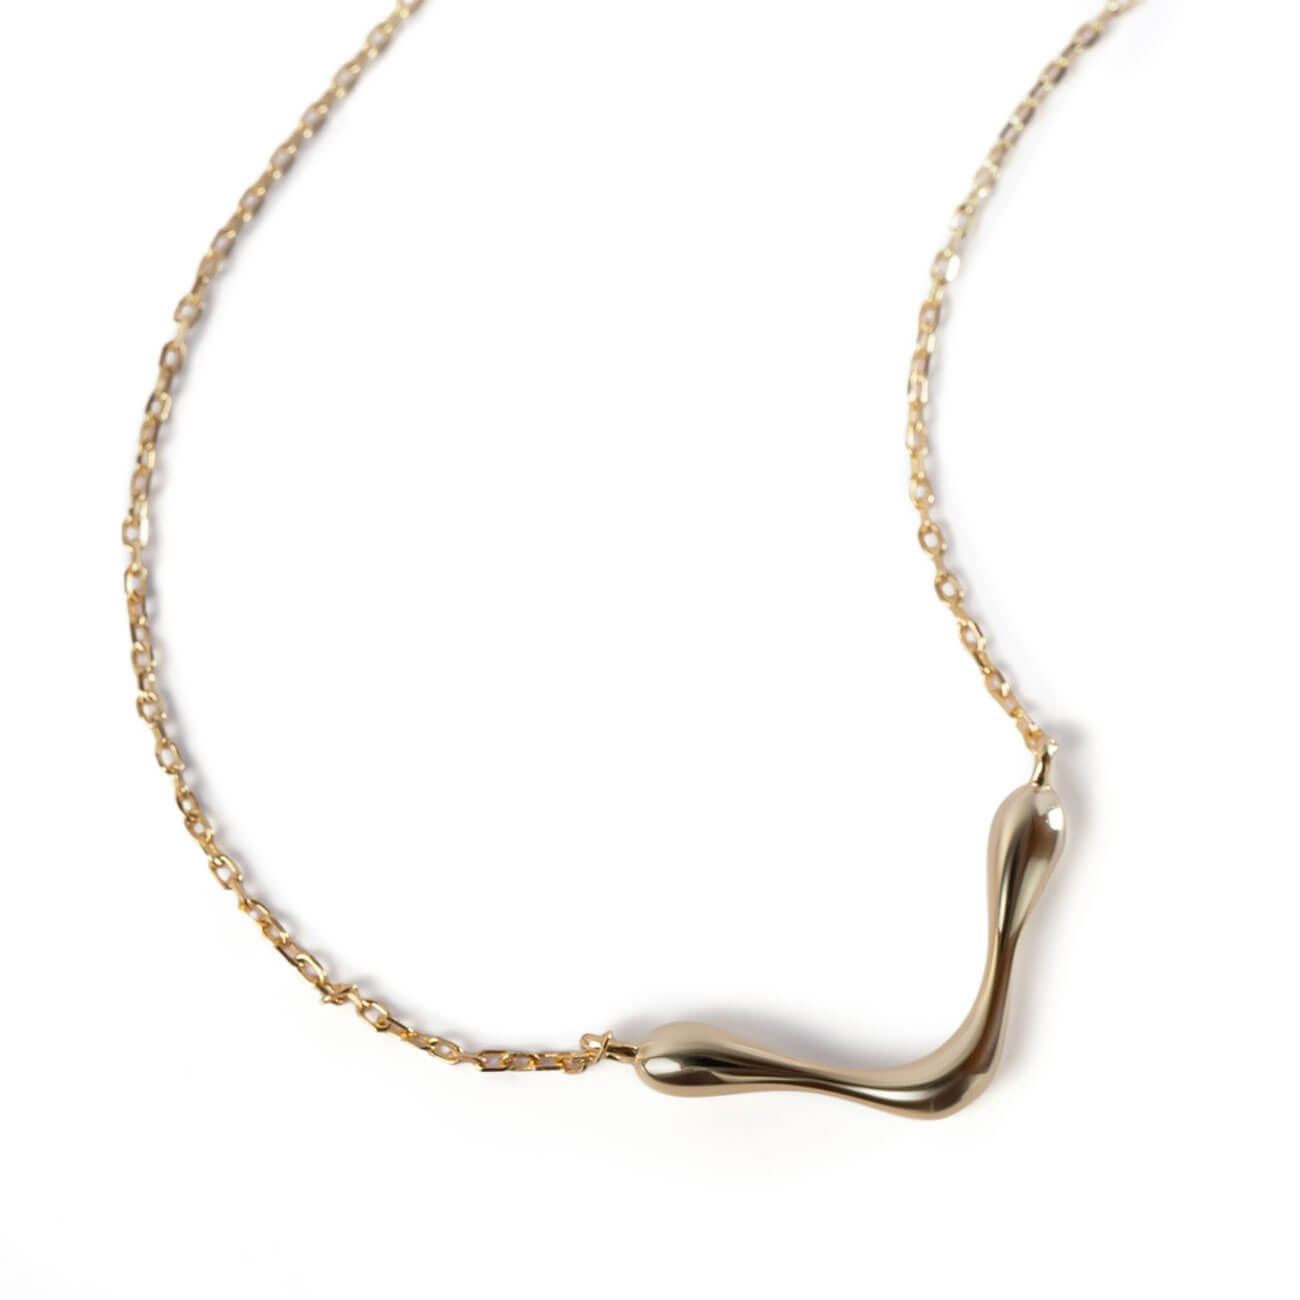 Silver925 Luster V Shaped Necklace | NERO-SILVER WEDGE NECKLACE